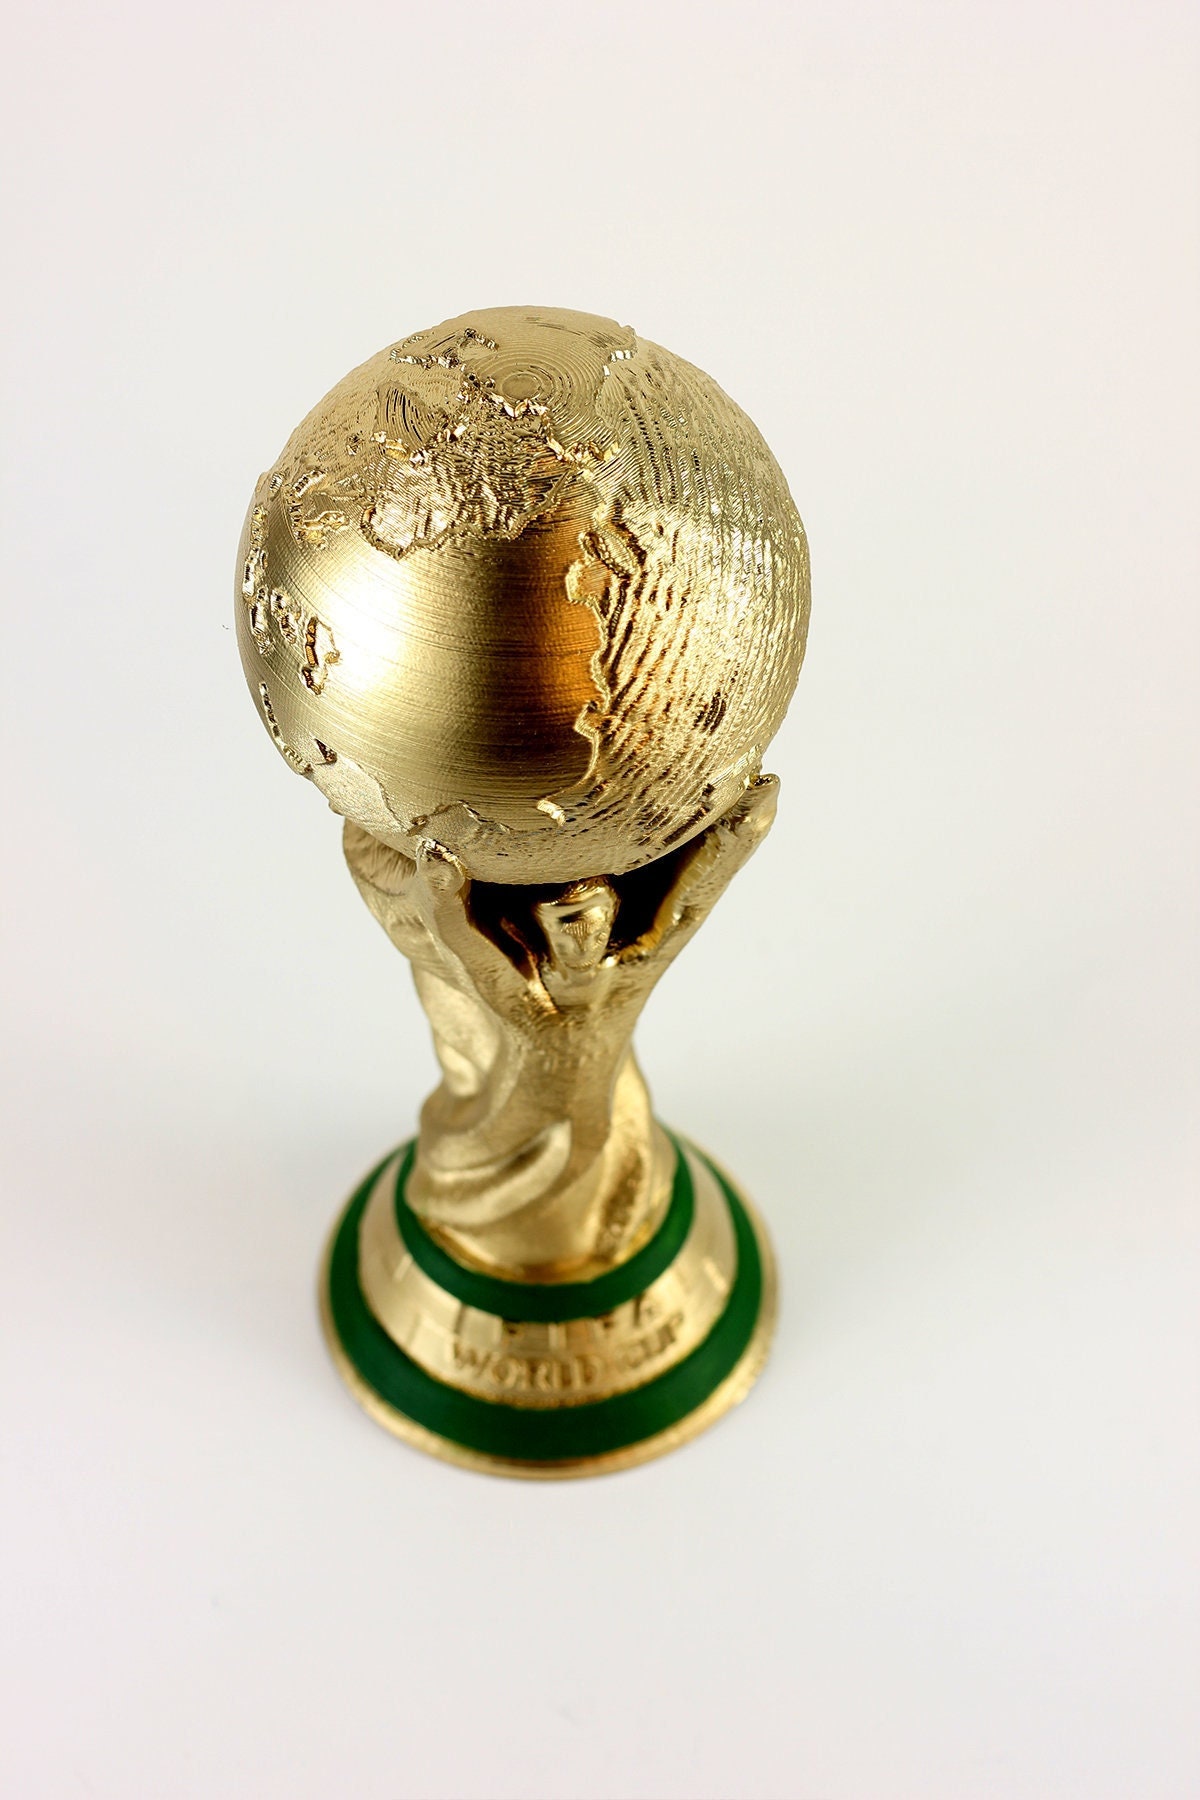 FIFA World Cup Trophy Replica in an Acrylic Case (Trophy Size 40 mm)